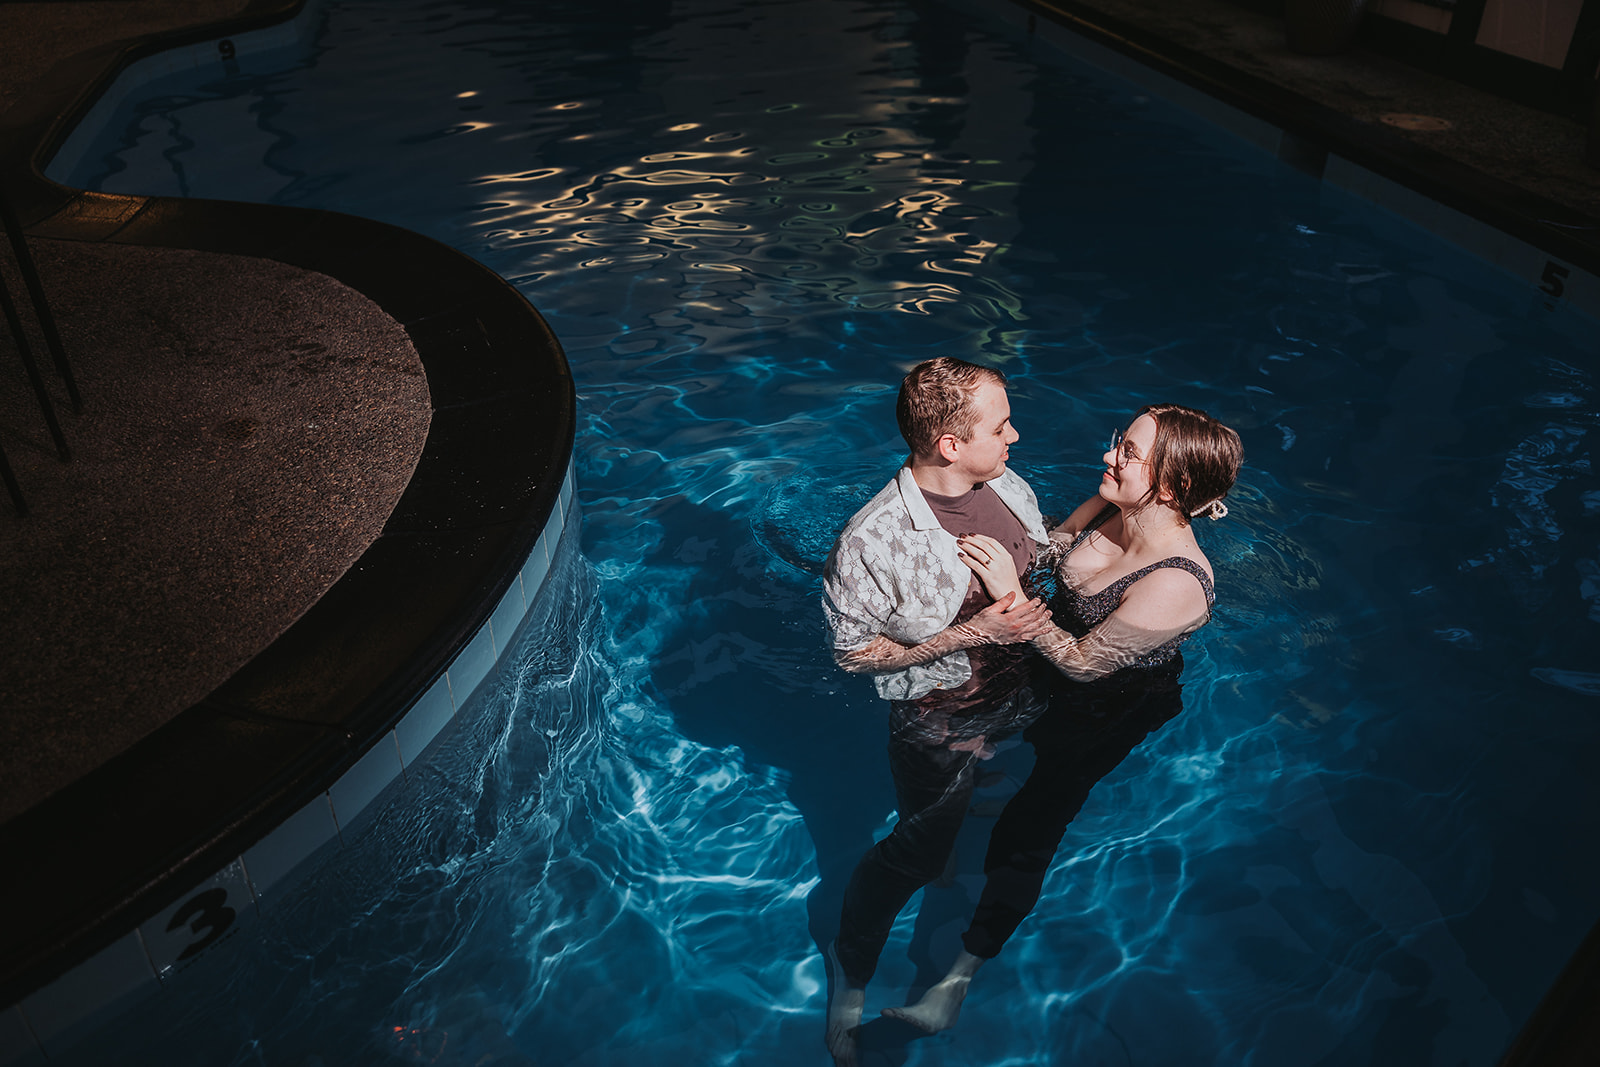 nighttime couples photos at a pool in minneapolis